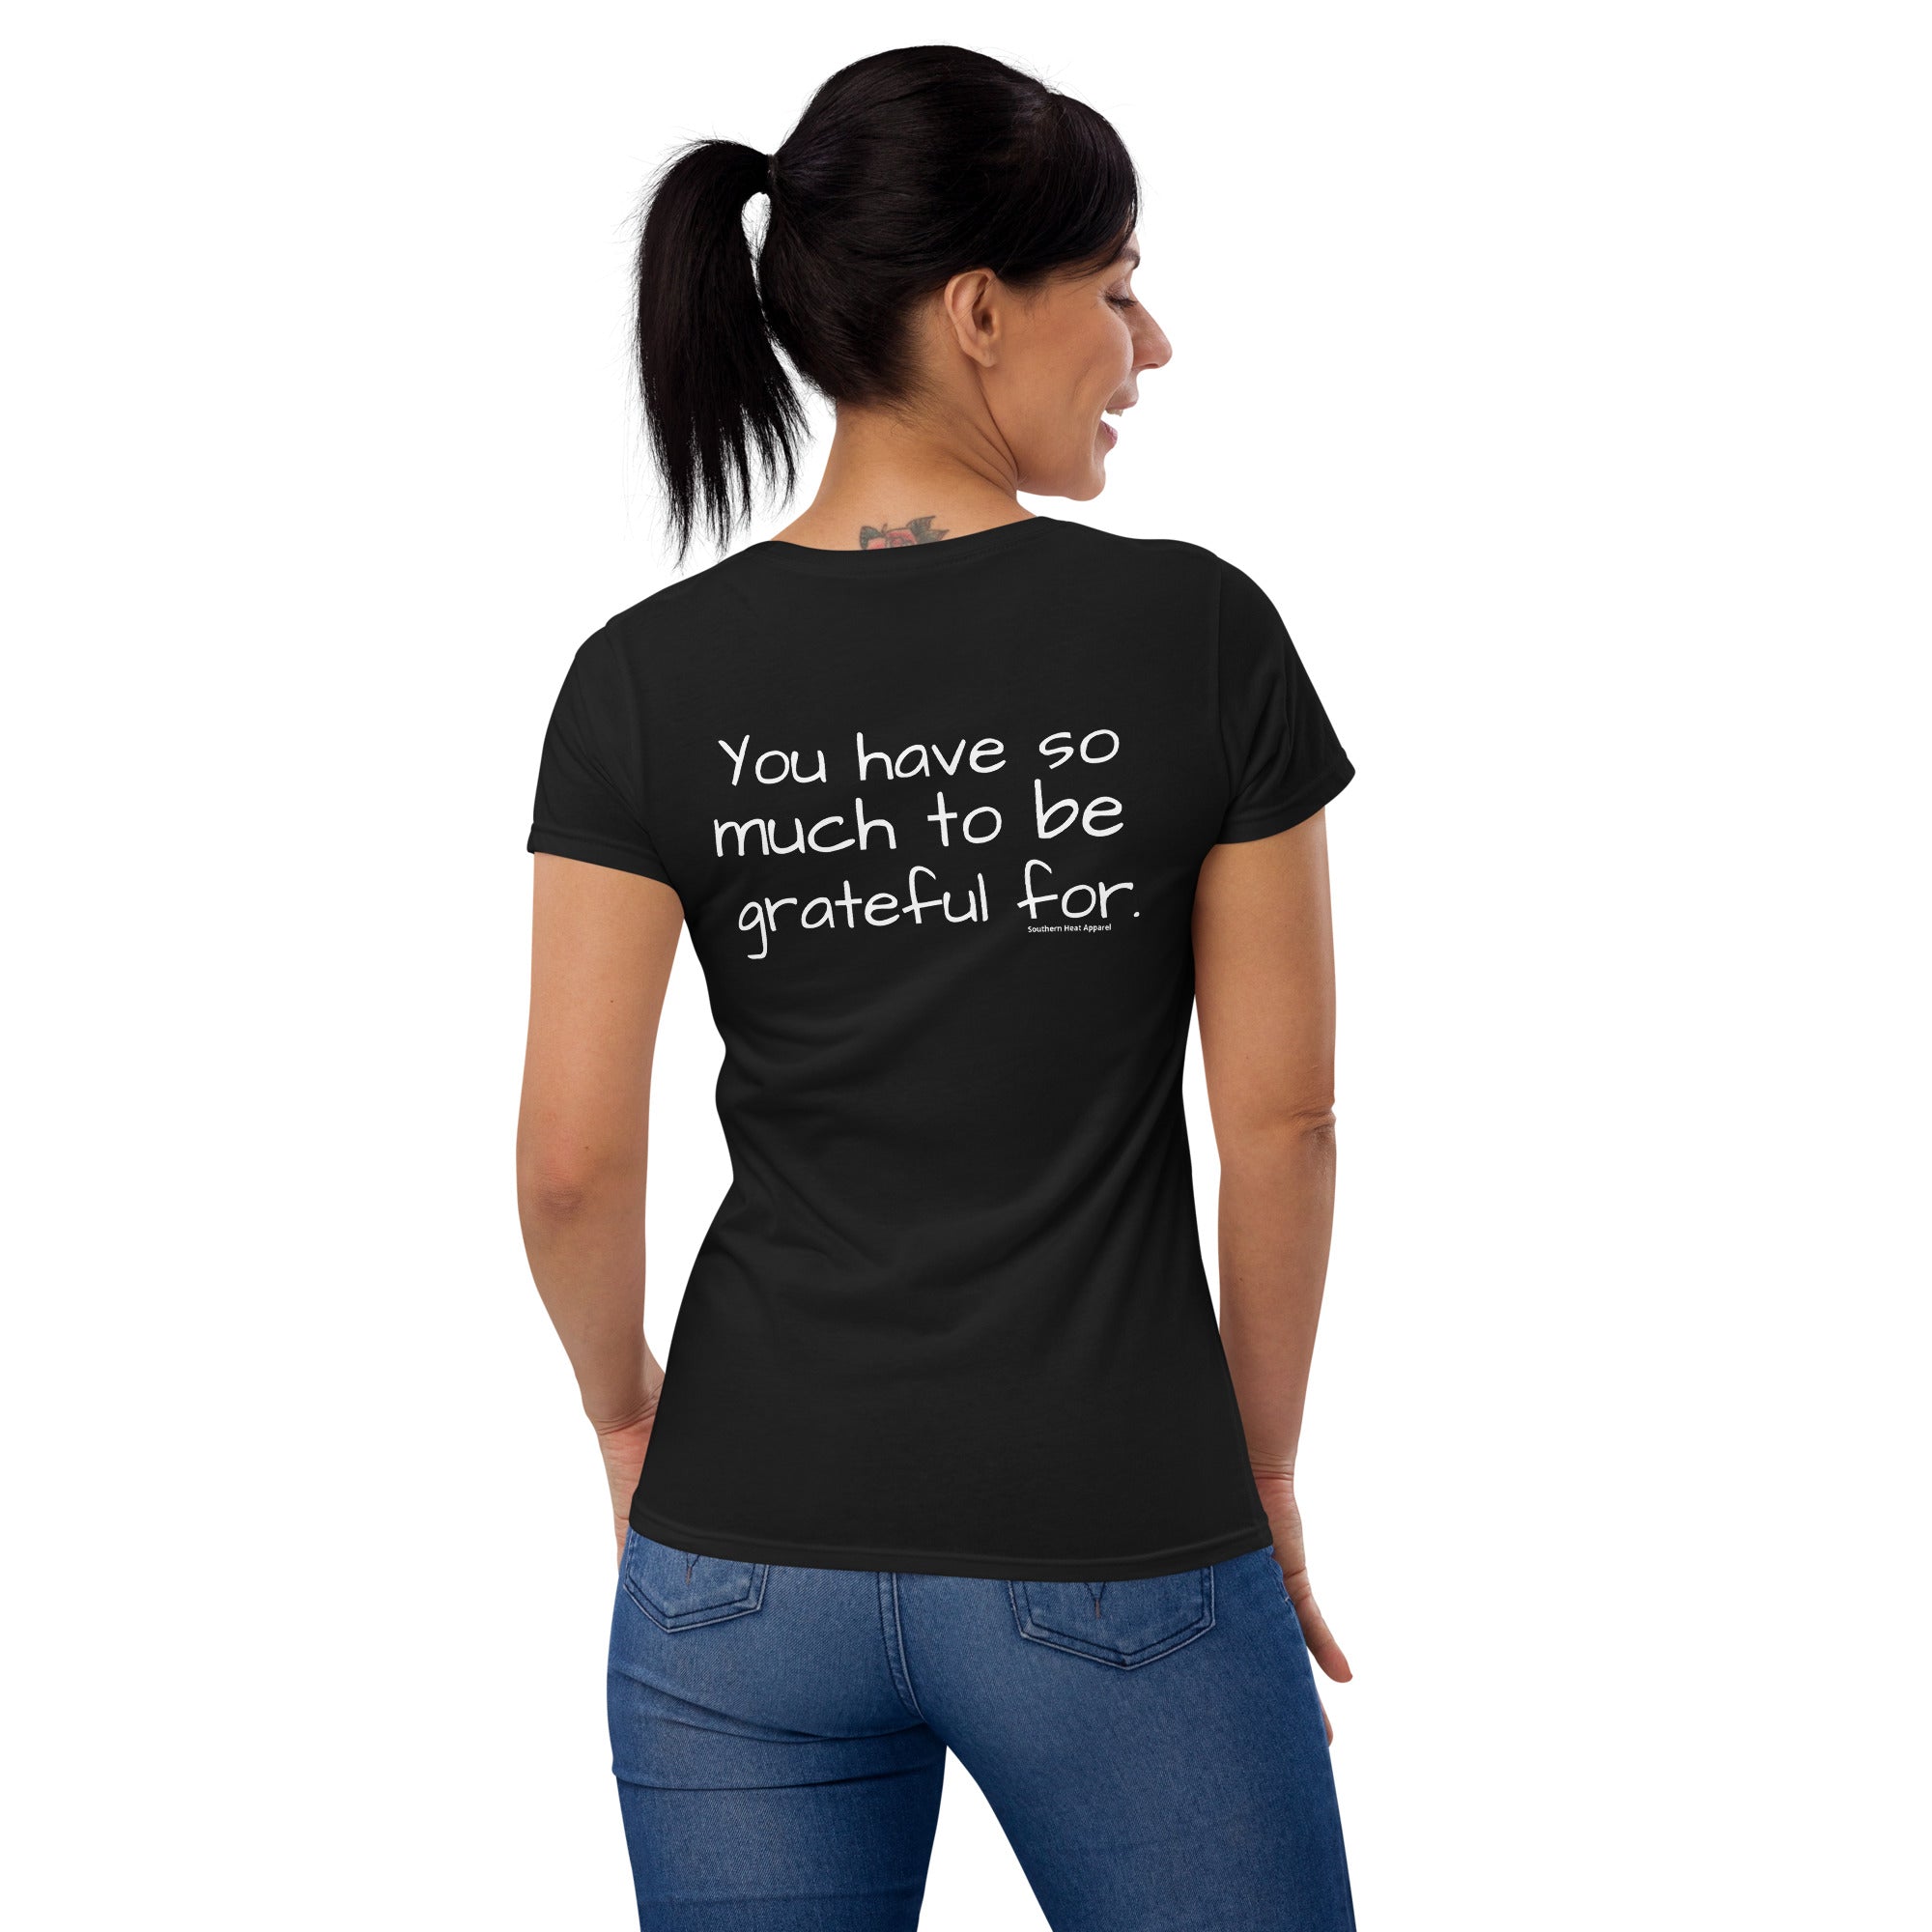 You have so much to be grateful for-Women's short sleeve t-shirt